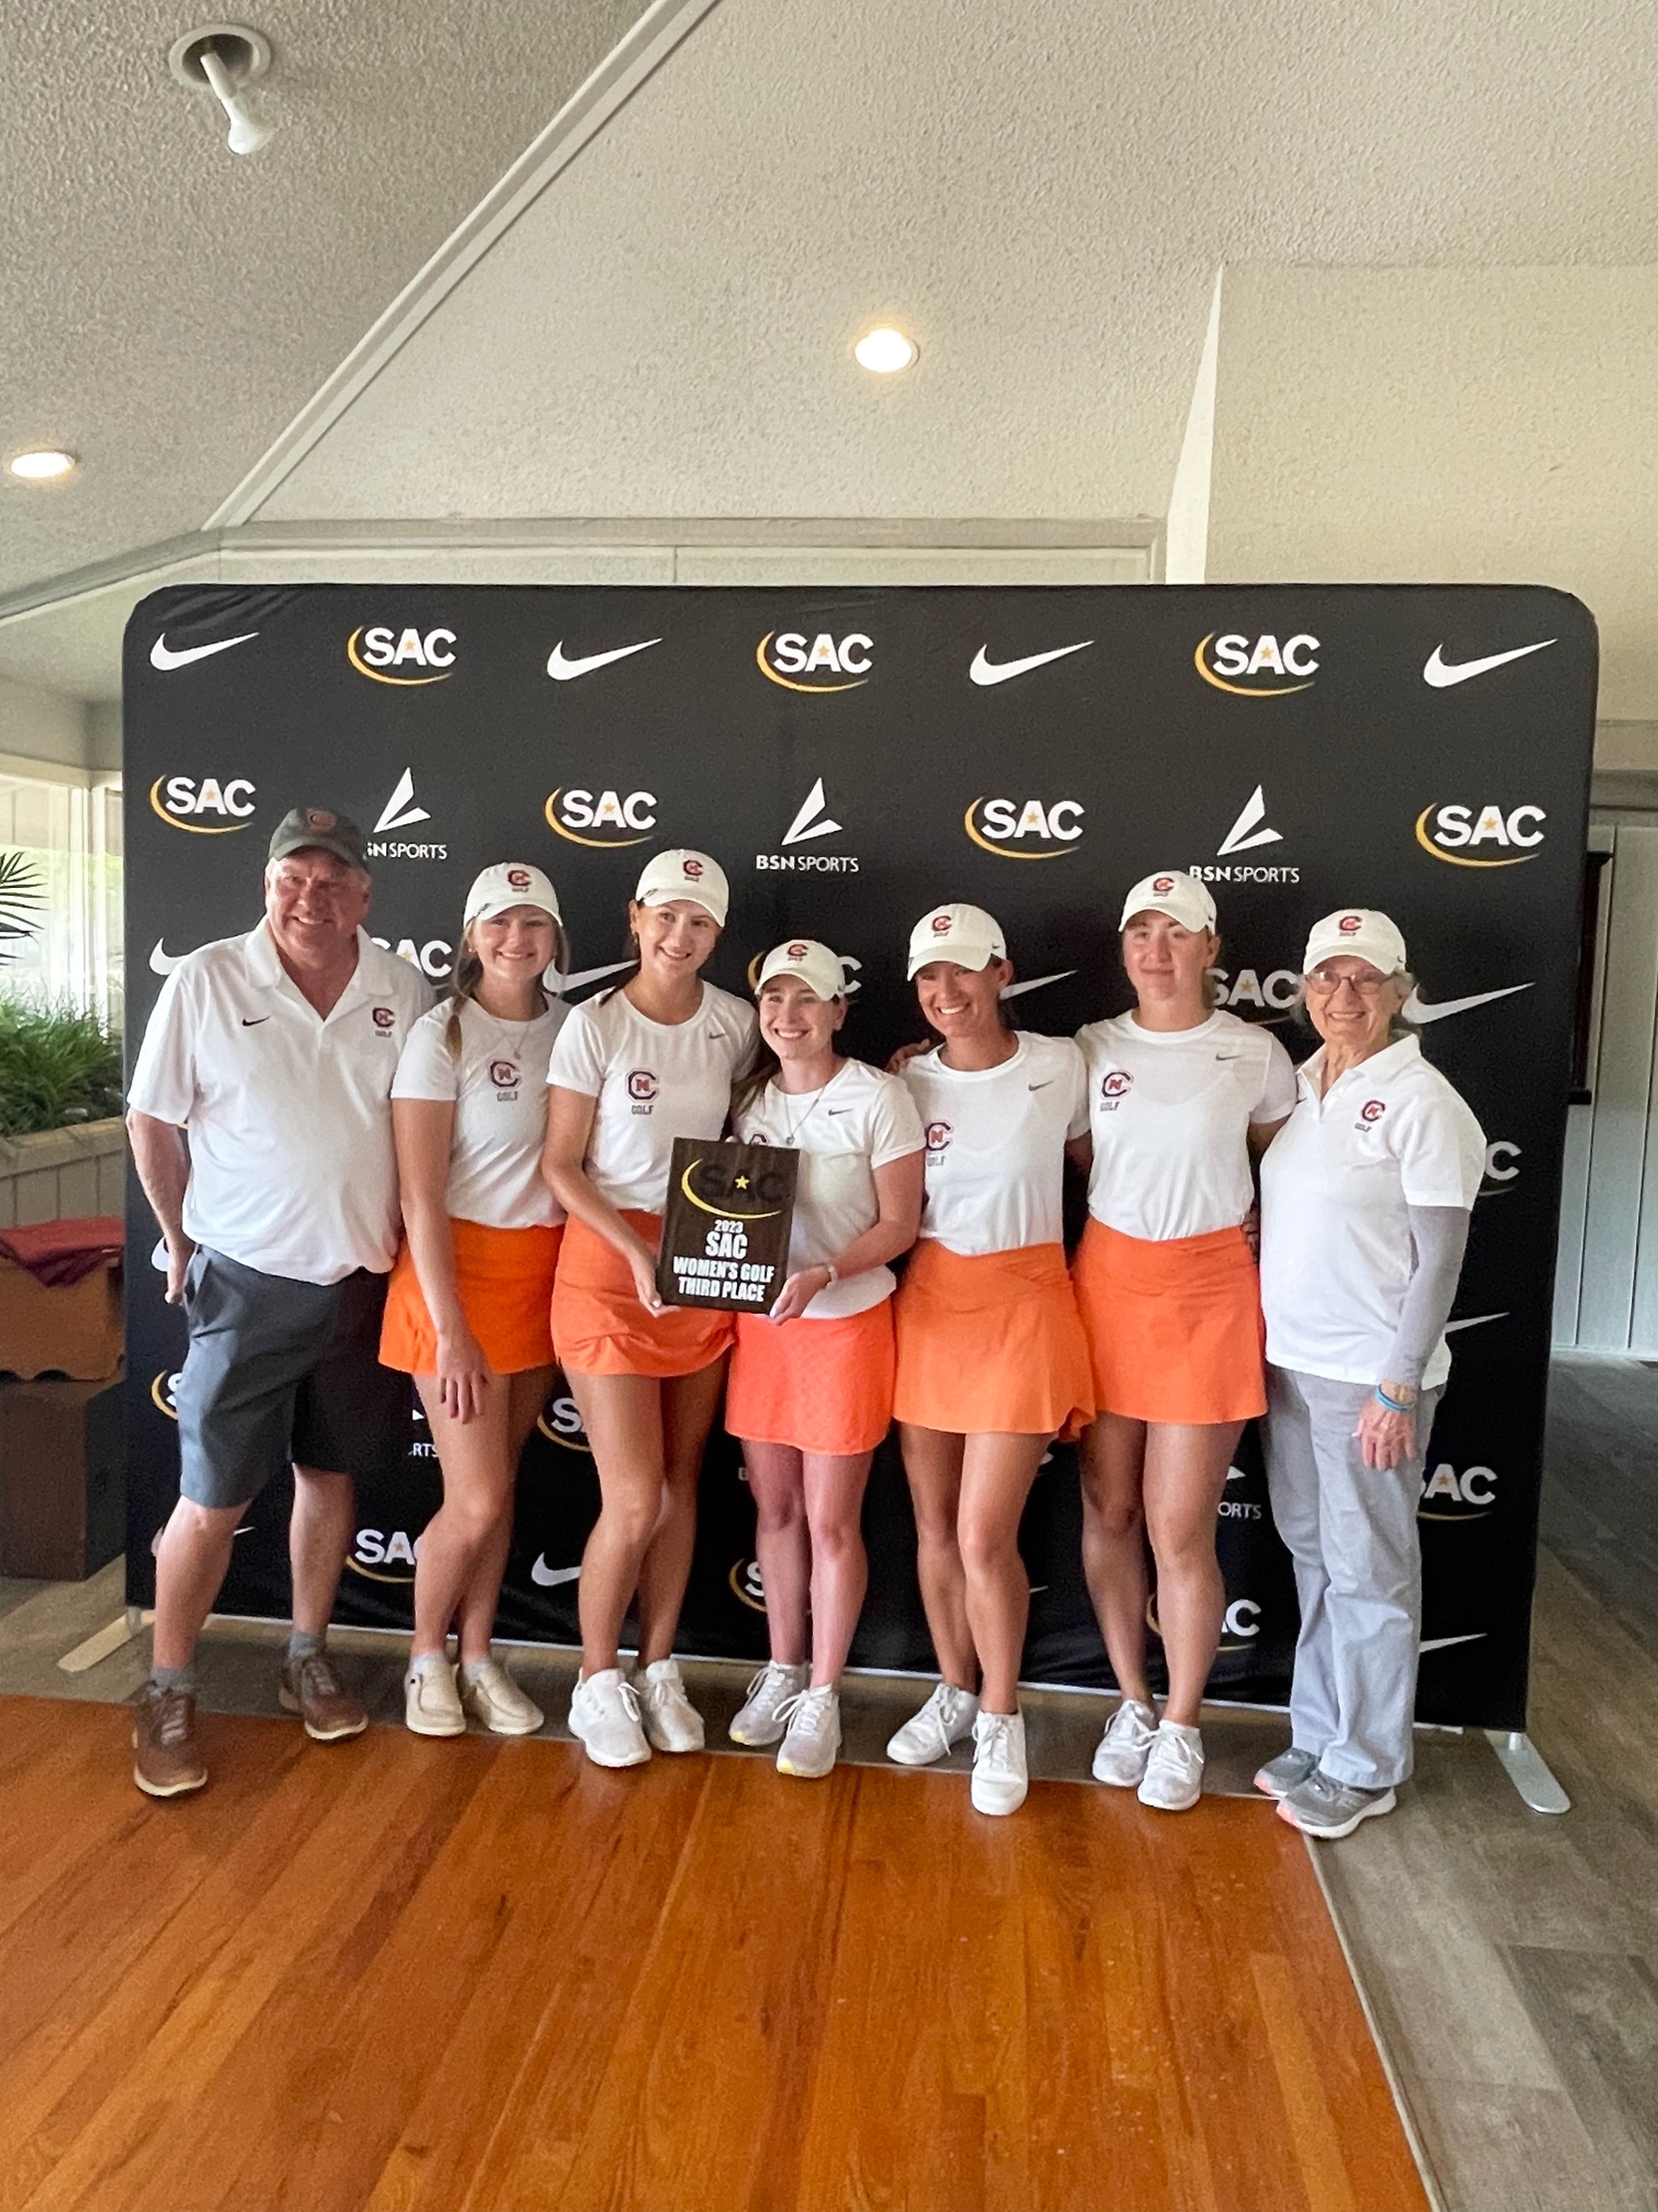 Record-breaking final round leads C-N to third place at SAC Championships